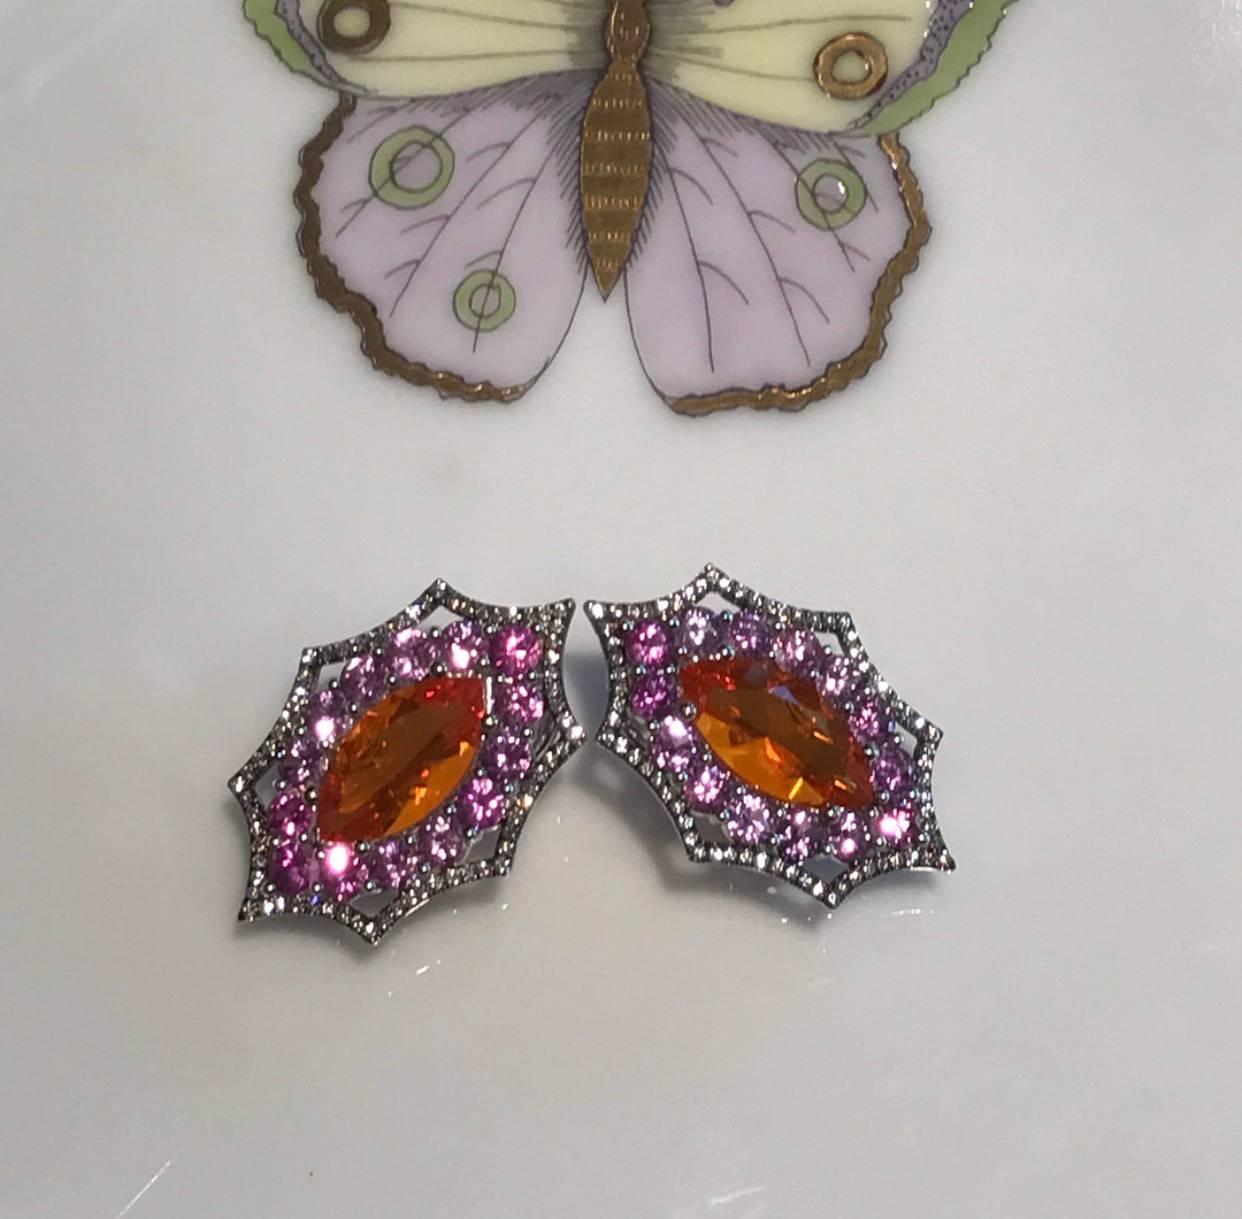 18 K white Gold Earrings with Mexican Opal in Marque shape is Surrounded with Purple Sapphires and accented with white Diamonds, Black Rhodium Plated. Color combination of Orange and Purple in this earring is inspired by the feathers of exotic bird,